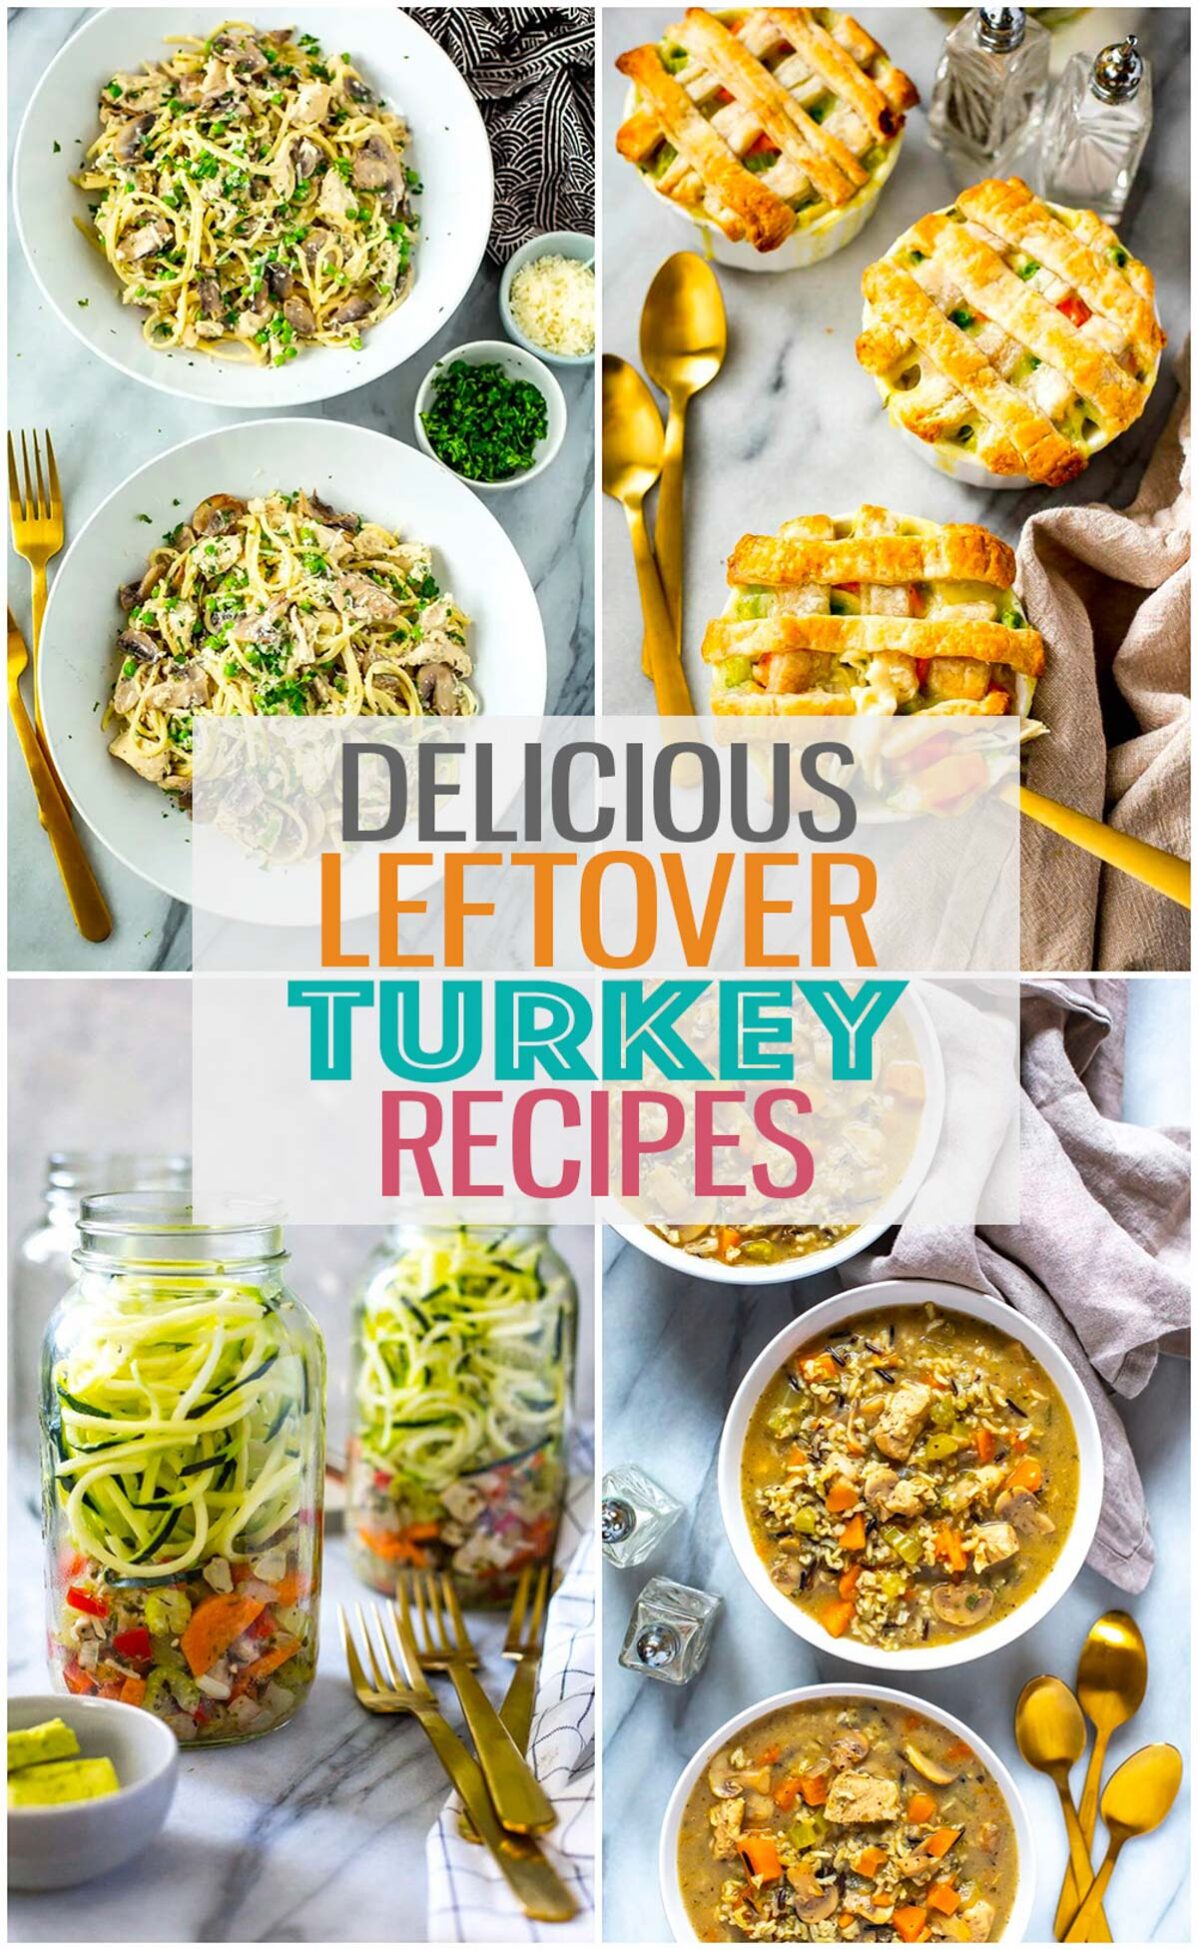 A collage of four different recipes with the text "Delicious Leftover Turkey Recipes" layered over top.